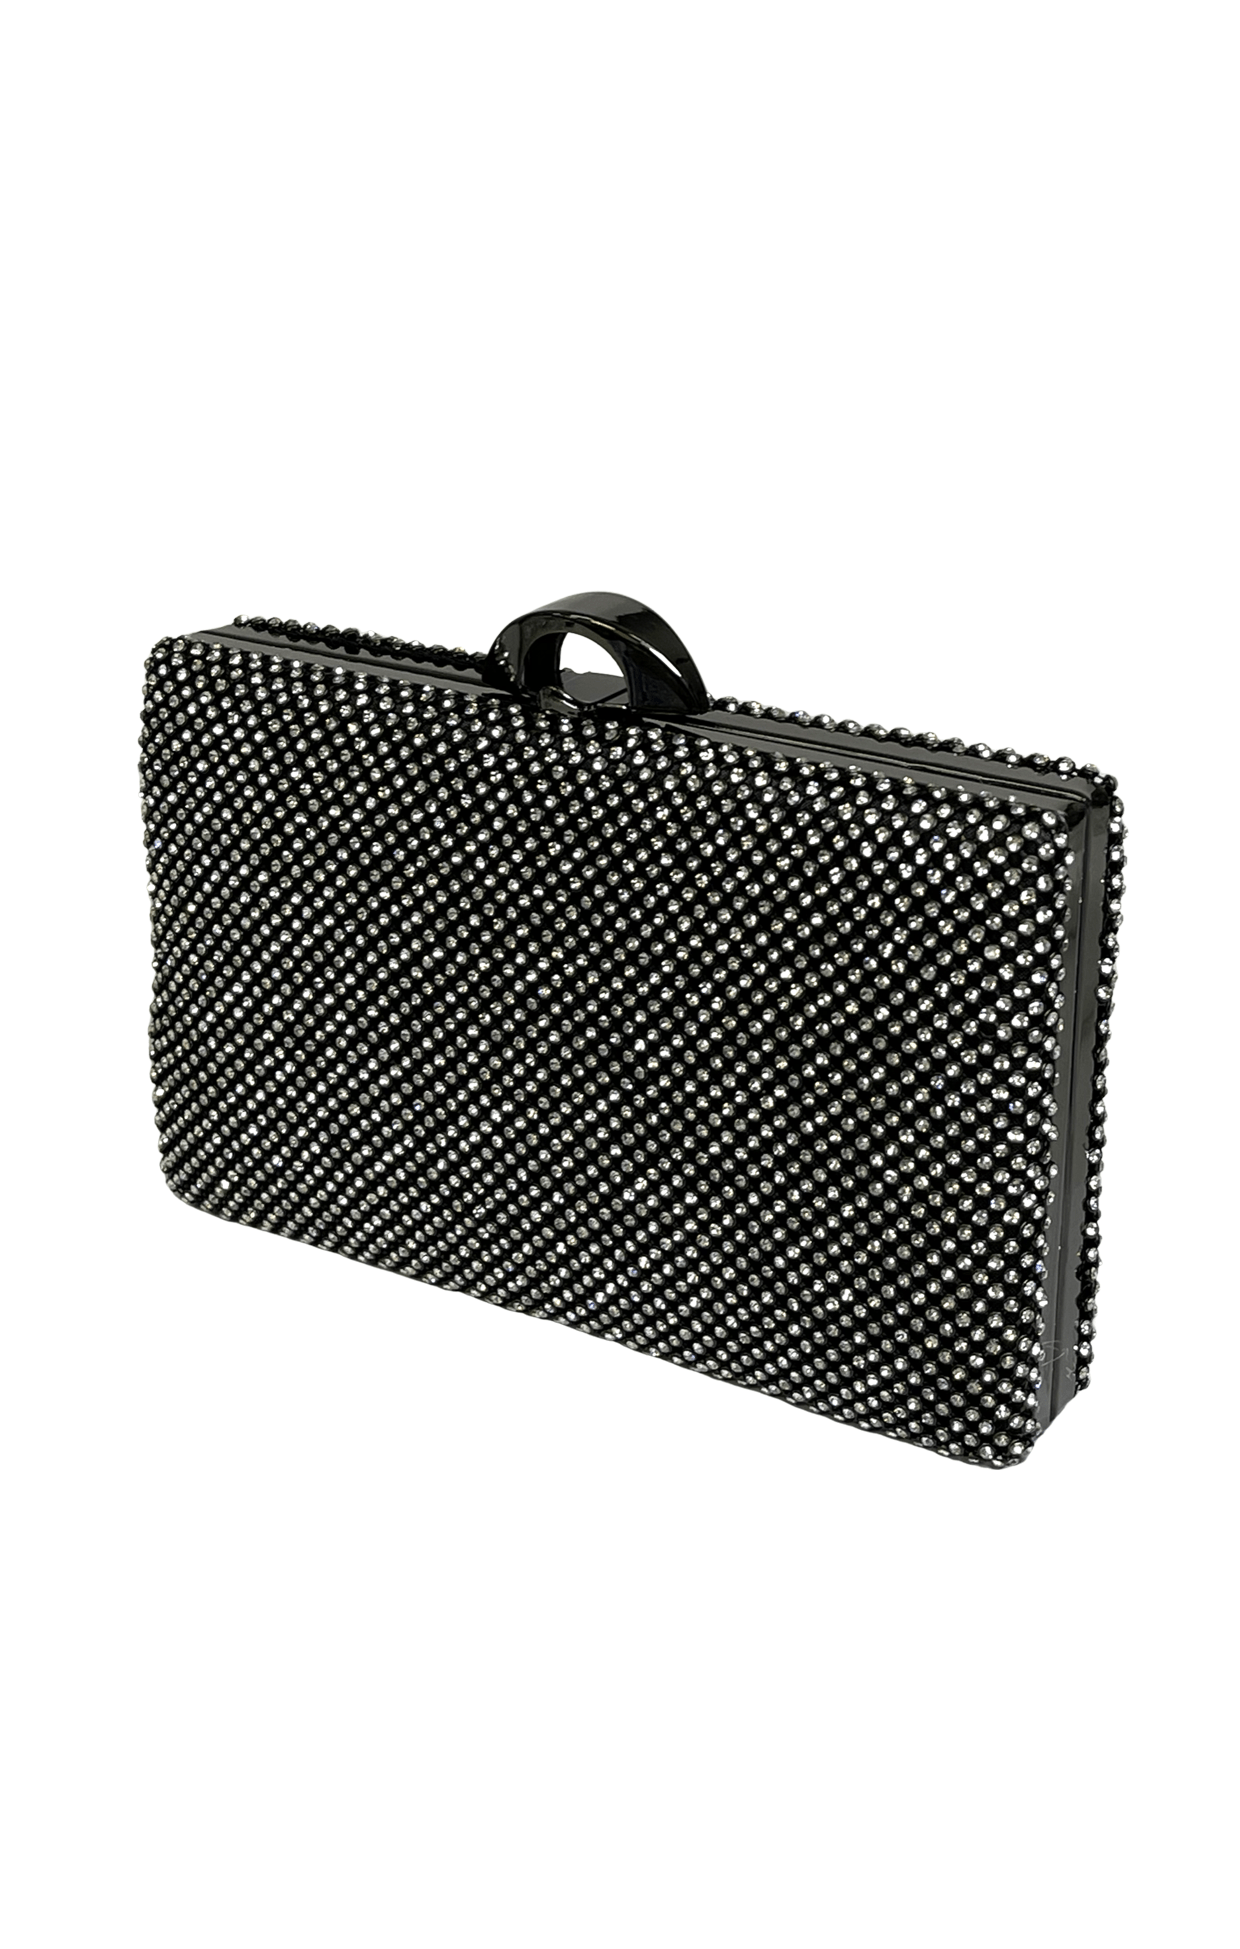 ACCESSORIES Bags Clutches One Size / Black MARIAH DIAMANTE STRUCTURED CLUTCH IN BLACK